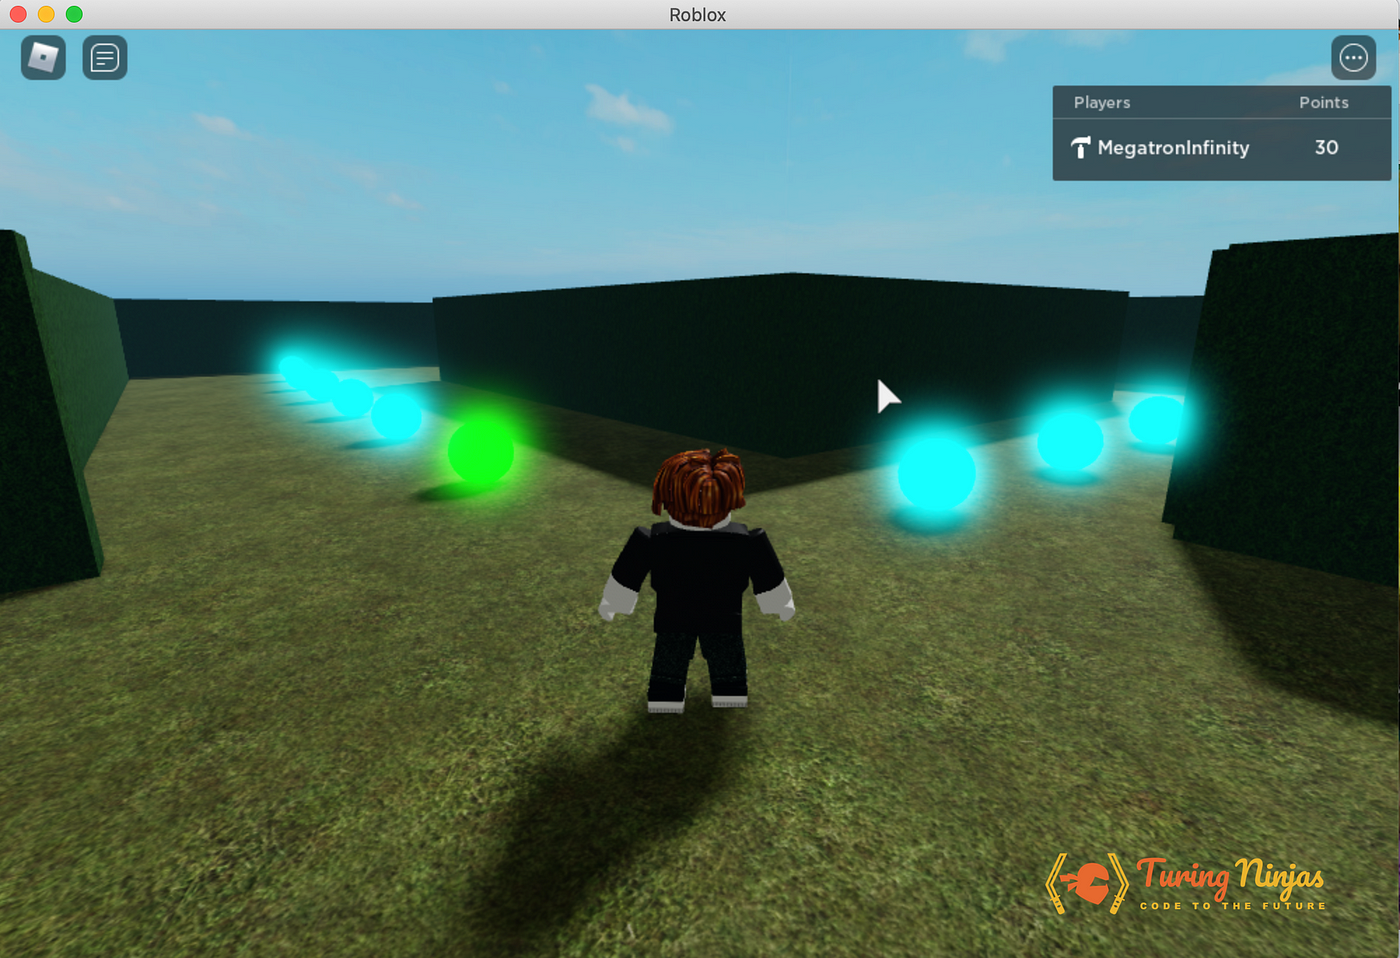 15 Fun Roblox games to play when you're bored!